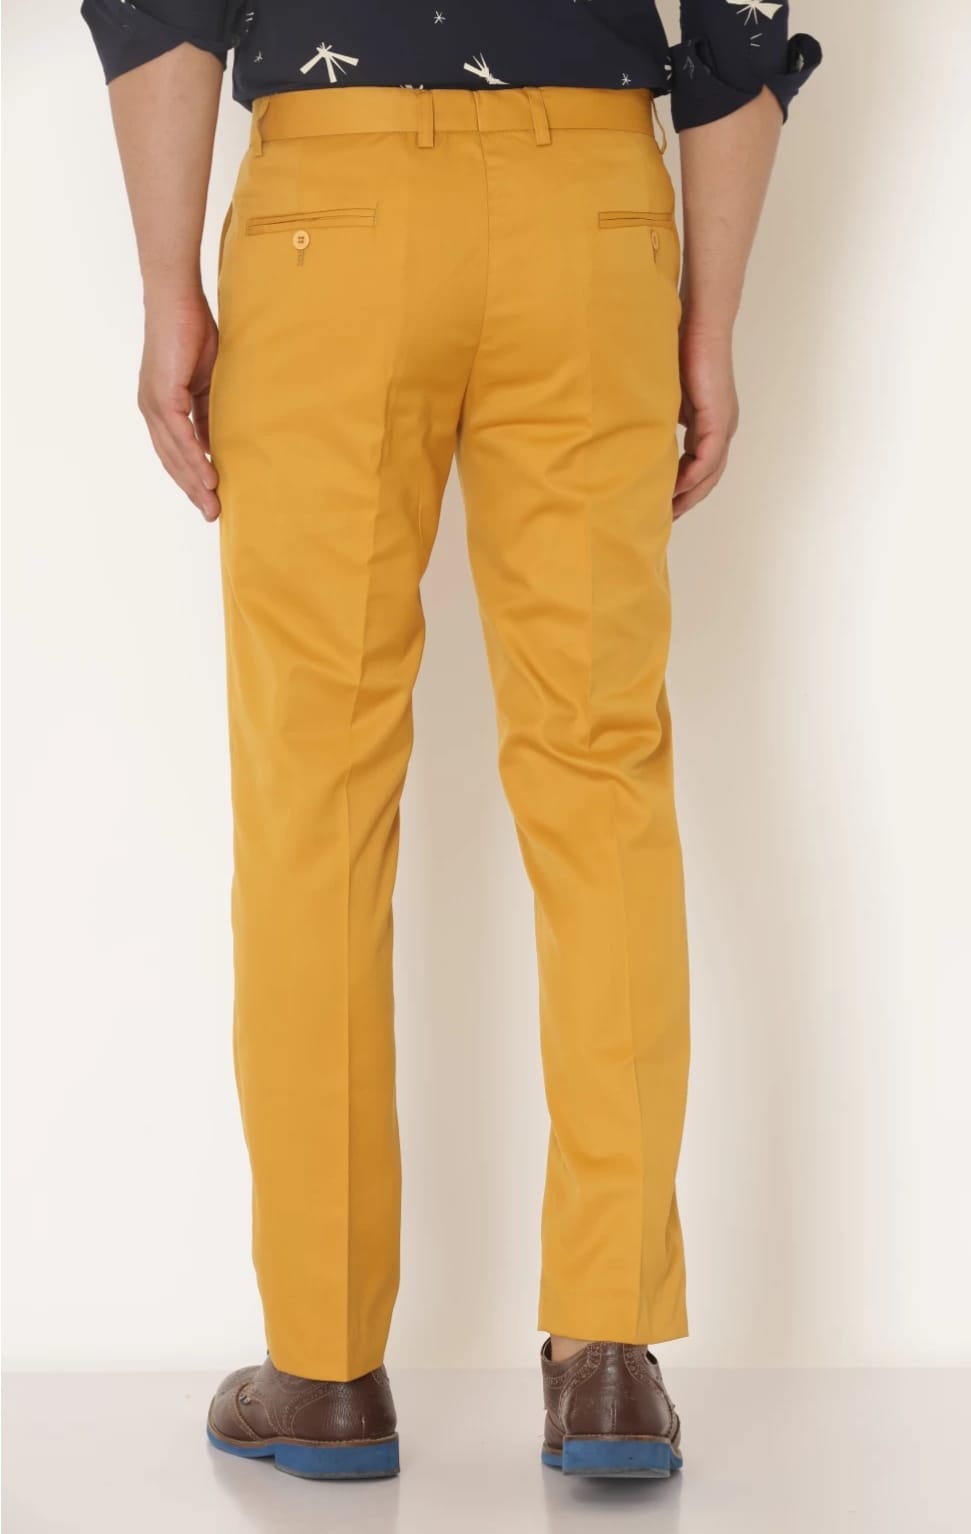 Mustard Corduroy Dress Pants with Mustard Pants Outfits For Men (5 ideas &  outfits) | Lookastic